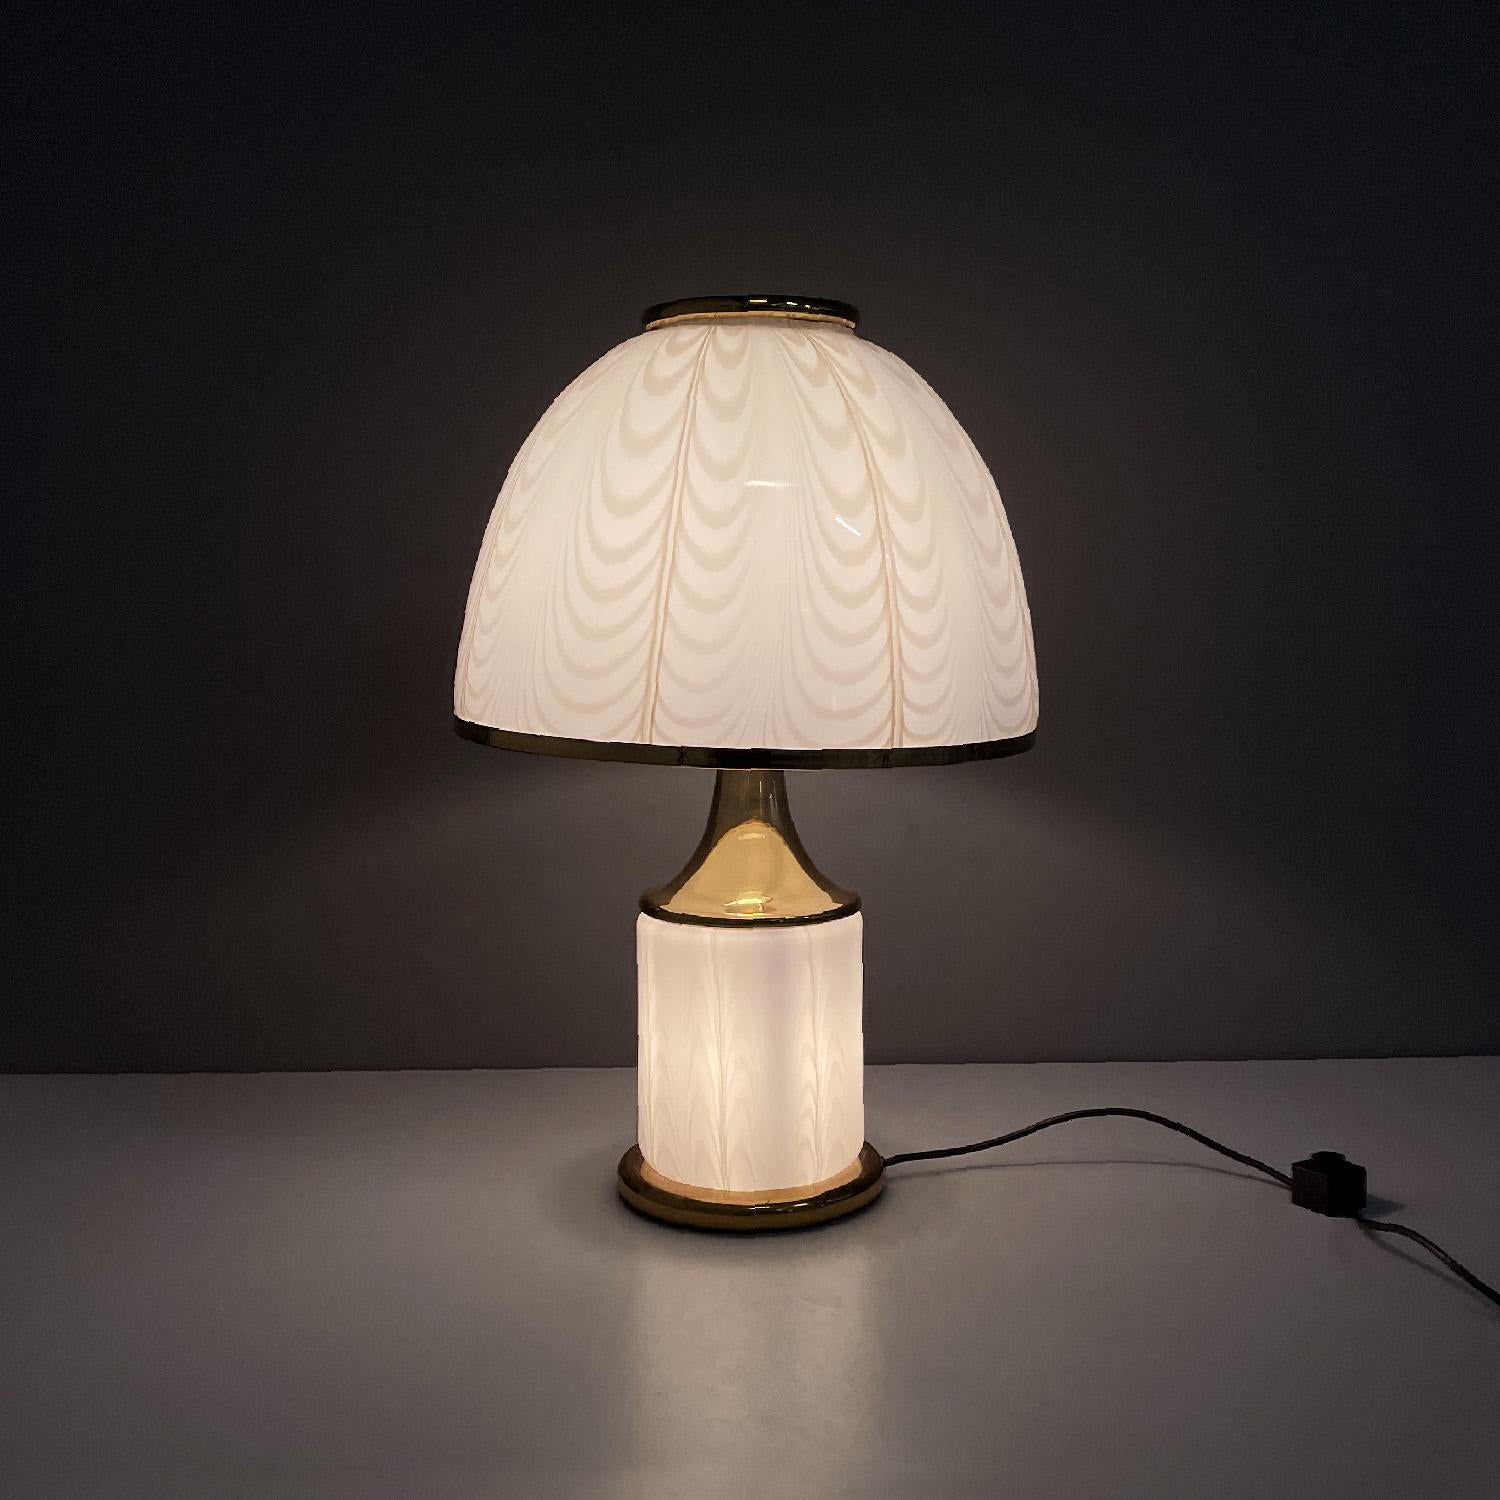 Italian modern table lamp in Murano glass by Fabbian Illuminazione, 1980s
Round base table lamp. The lamp is composed of a cylindrical structure in opaline Murano glass with a slightly raised texture of light yellow color, the same finish and